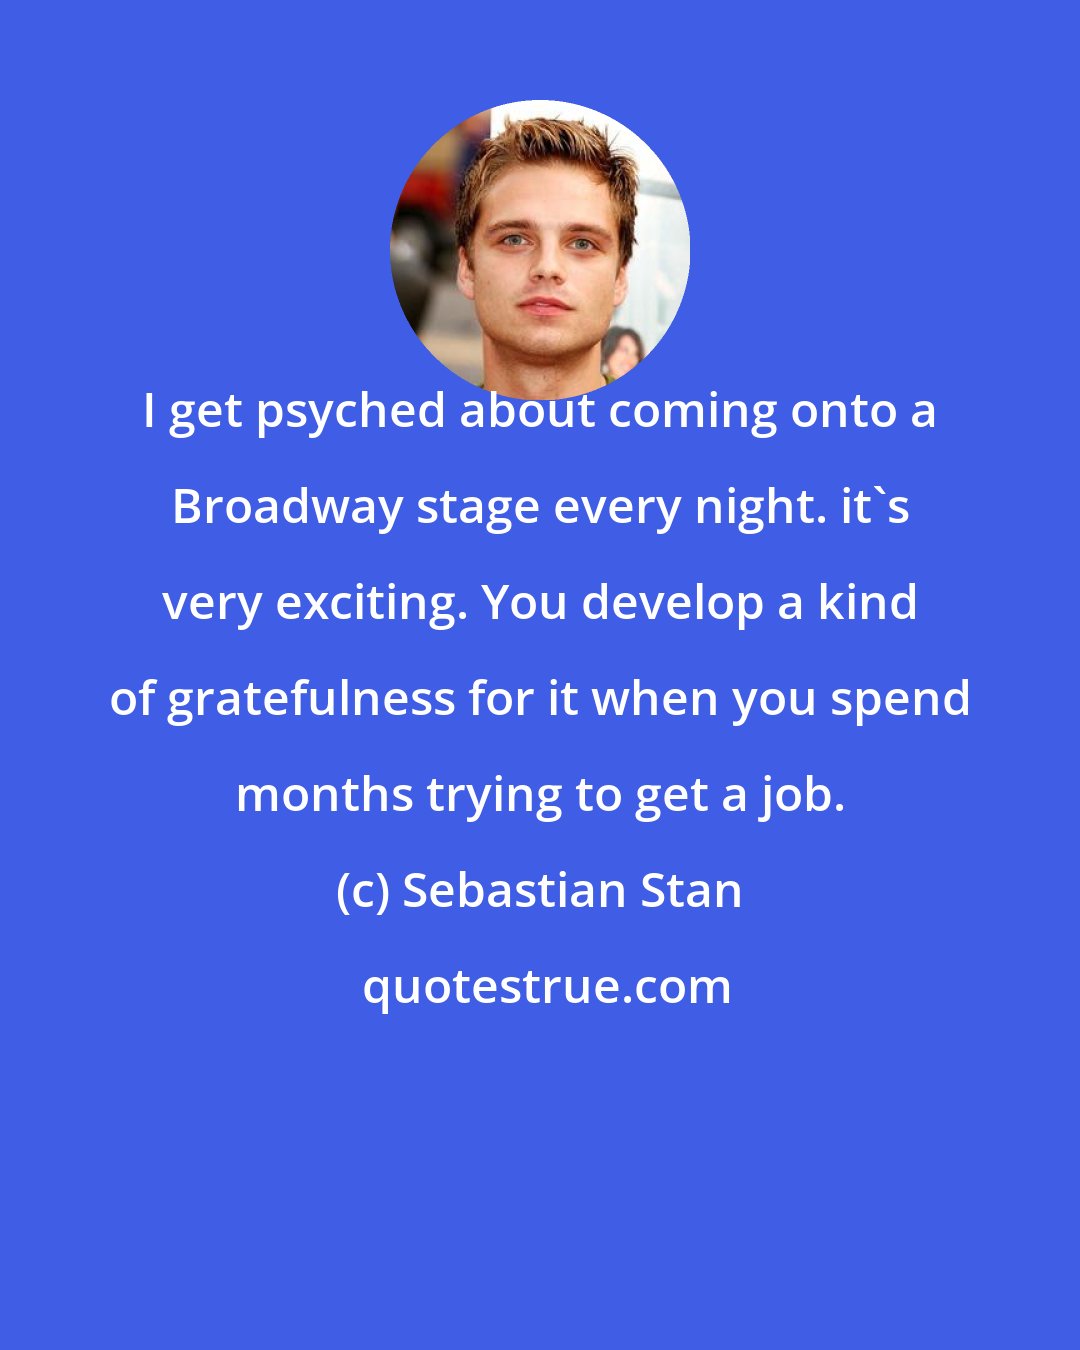 Sebastian Stan: I get psyched about coming onto a Broadway stage every night. it's very exciting. You develop a kind of gratefulness for it when you spend months trying to get a job.